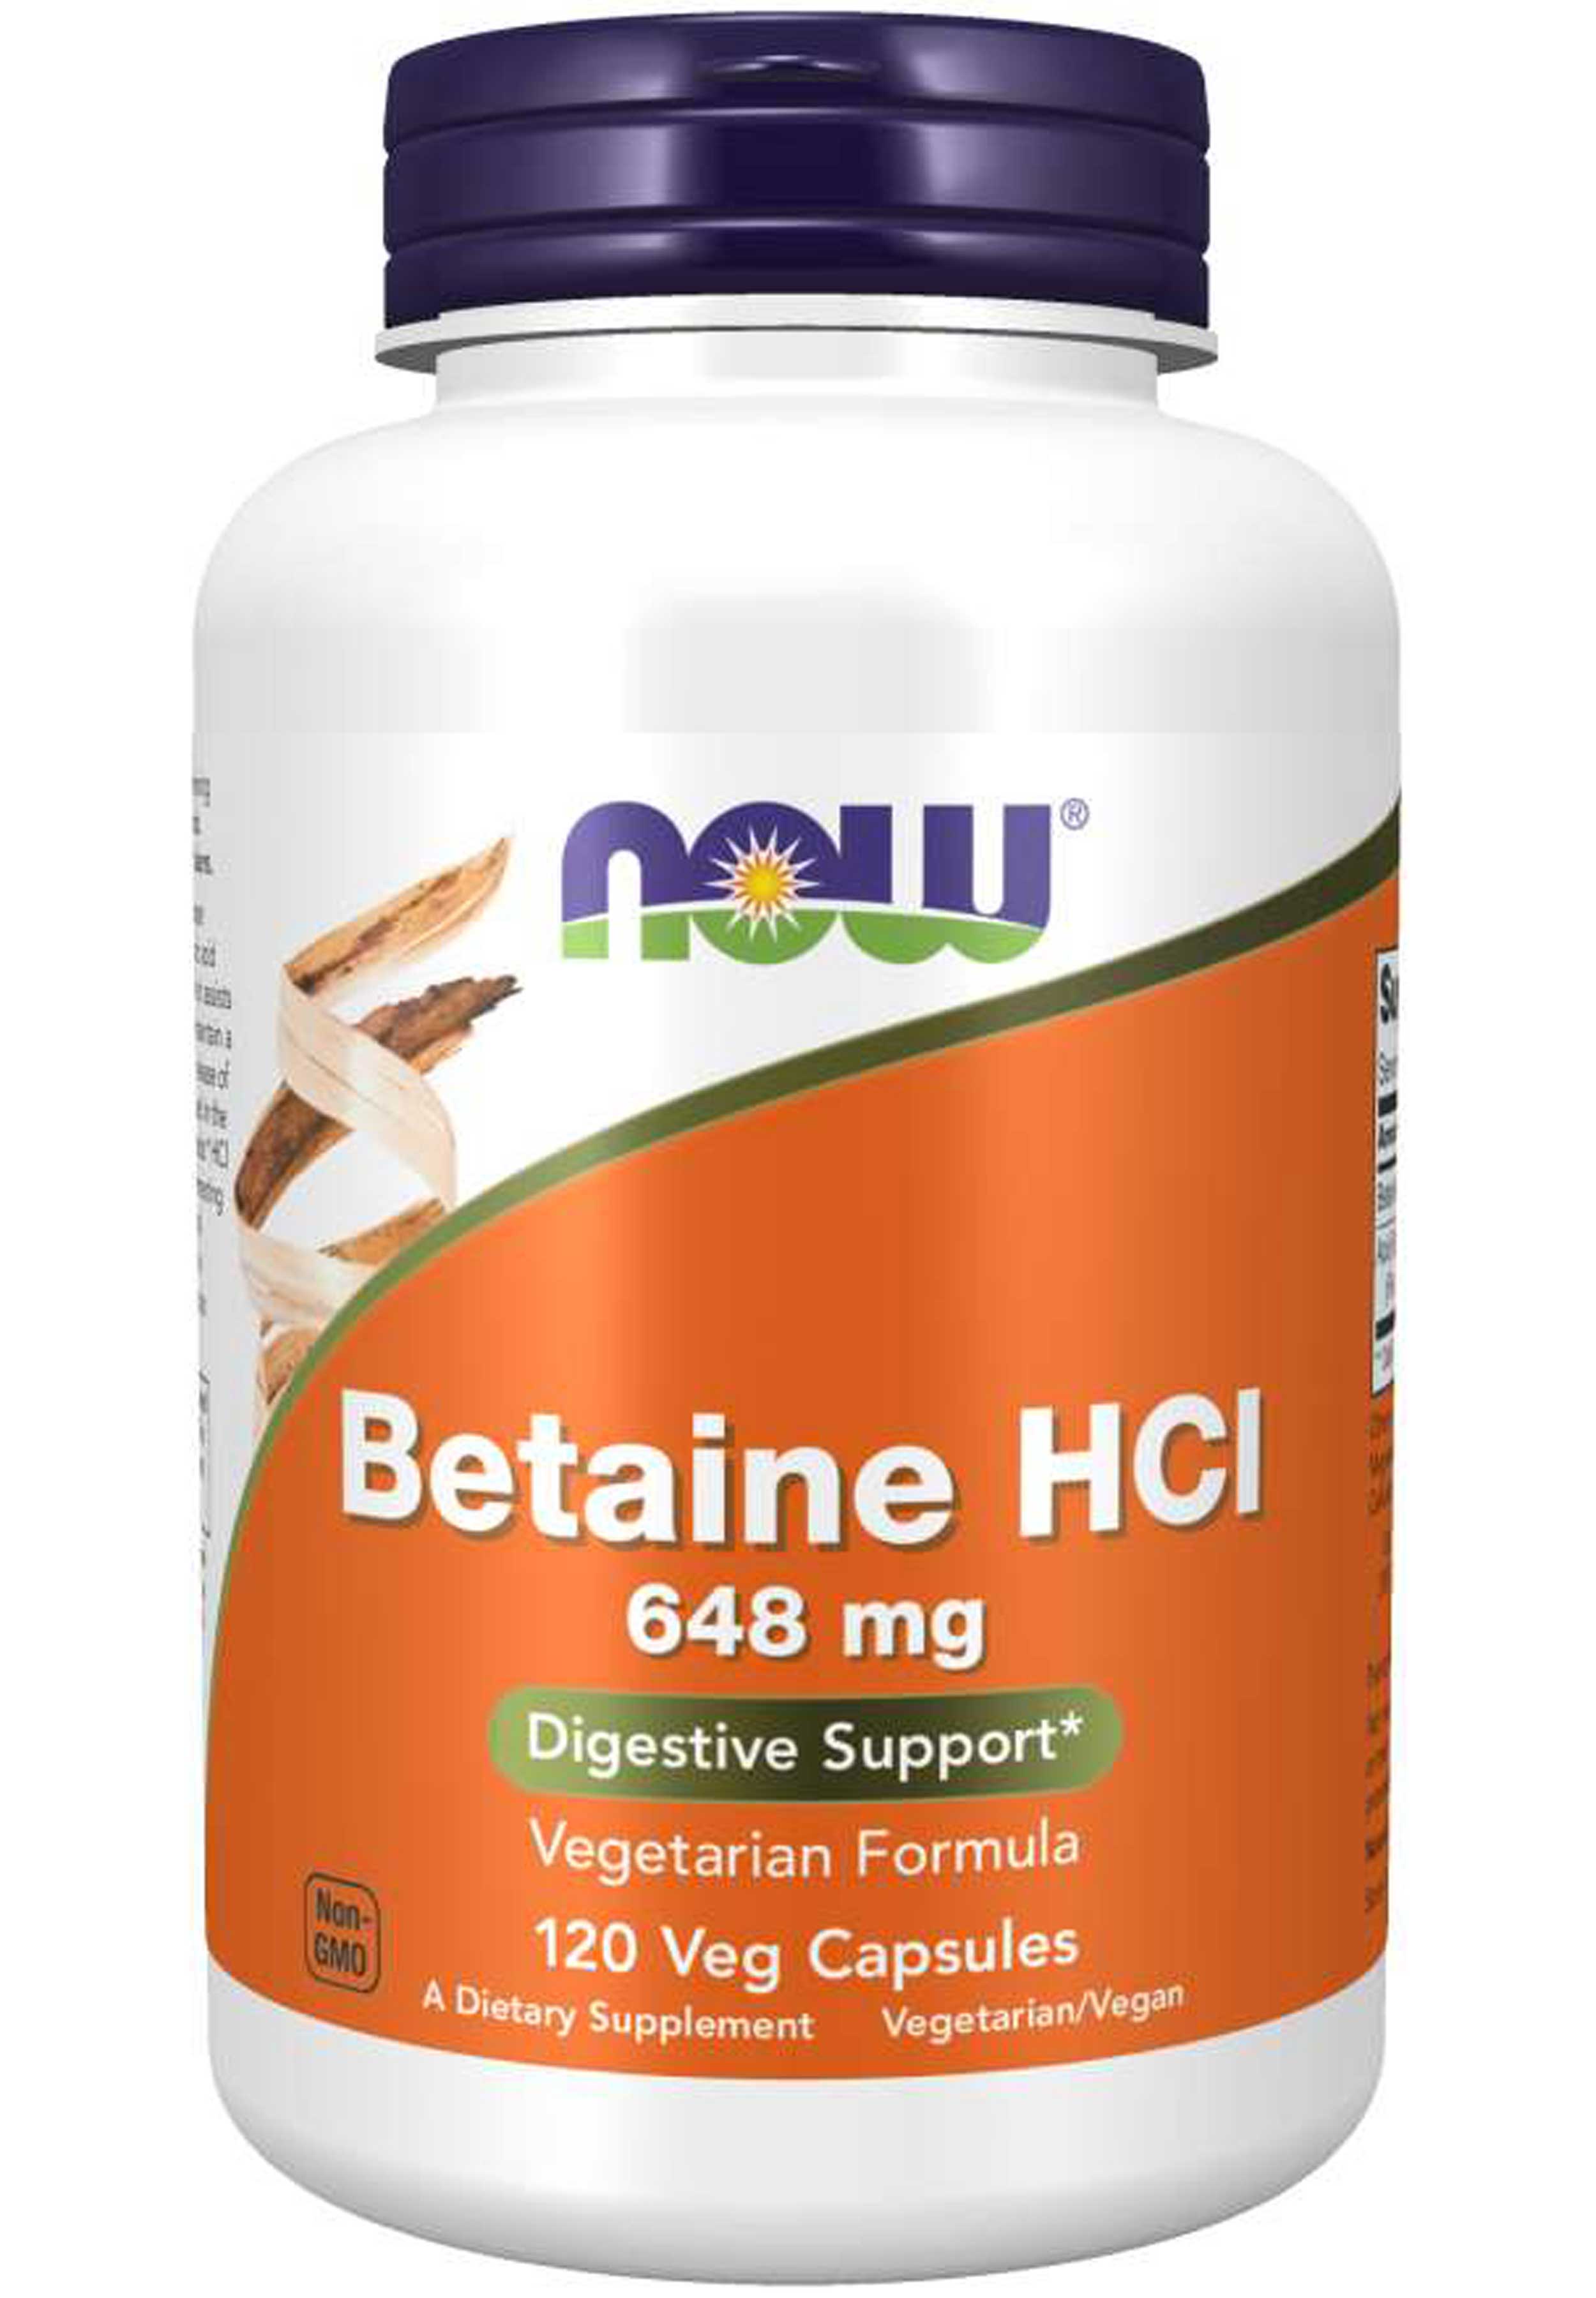 NOW Betaine HCl 648 mg